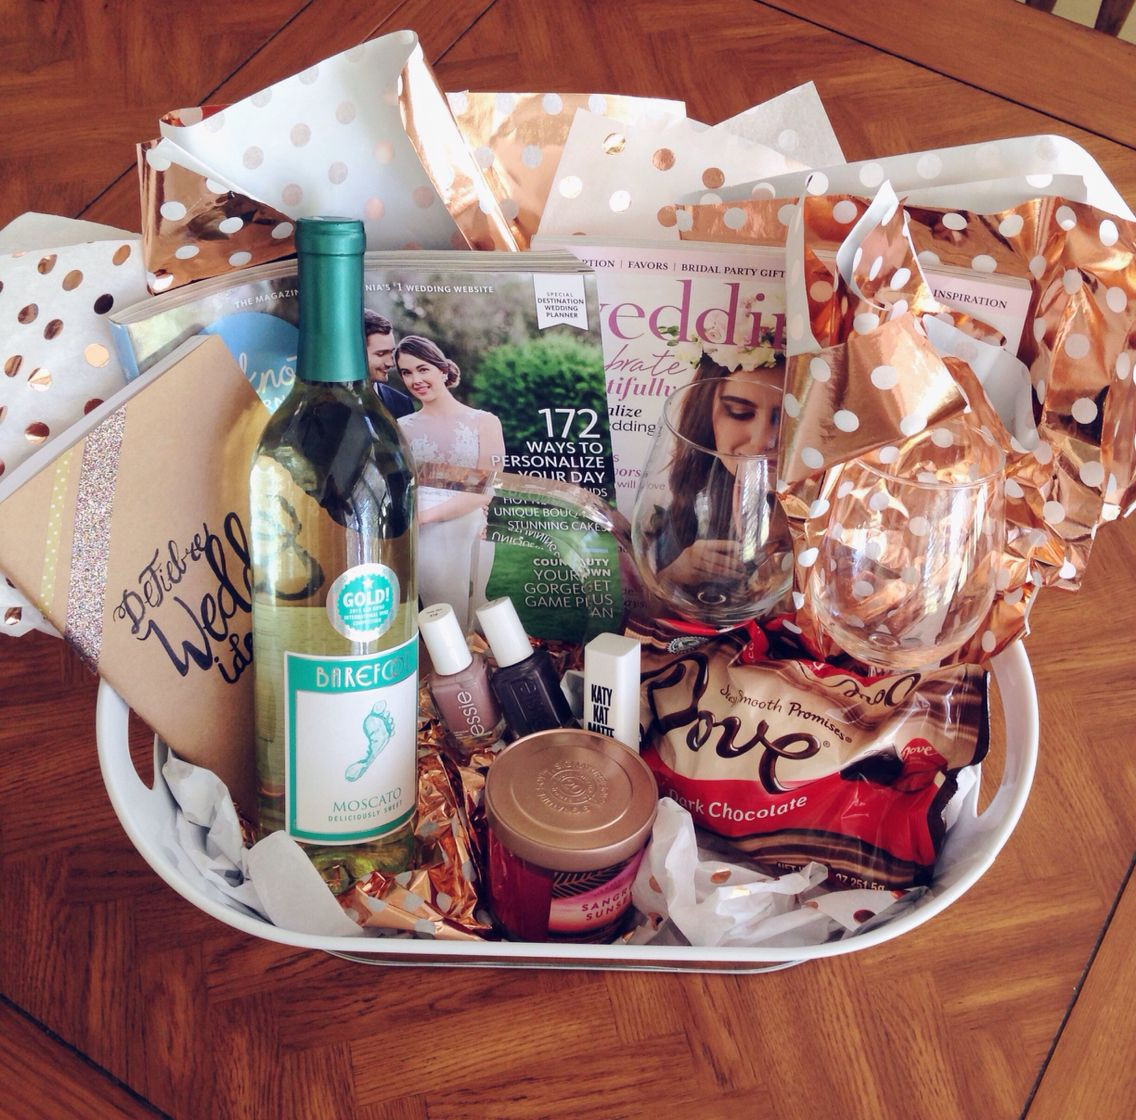 Engagement Party Gift Basket Ideas
 Engagement Gift Basket Survival Kit Everything your